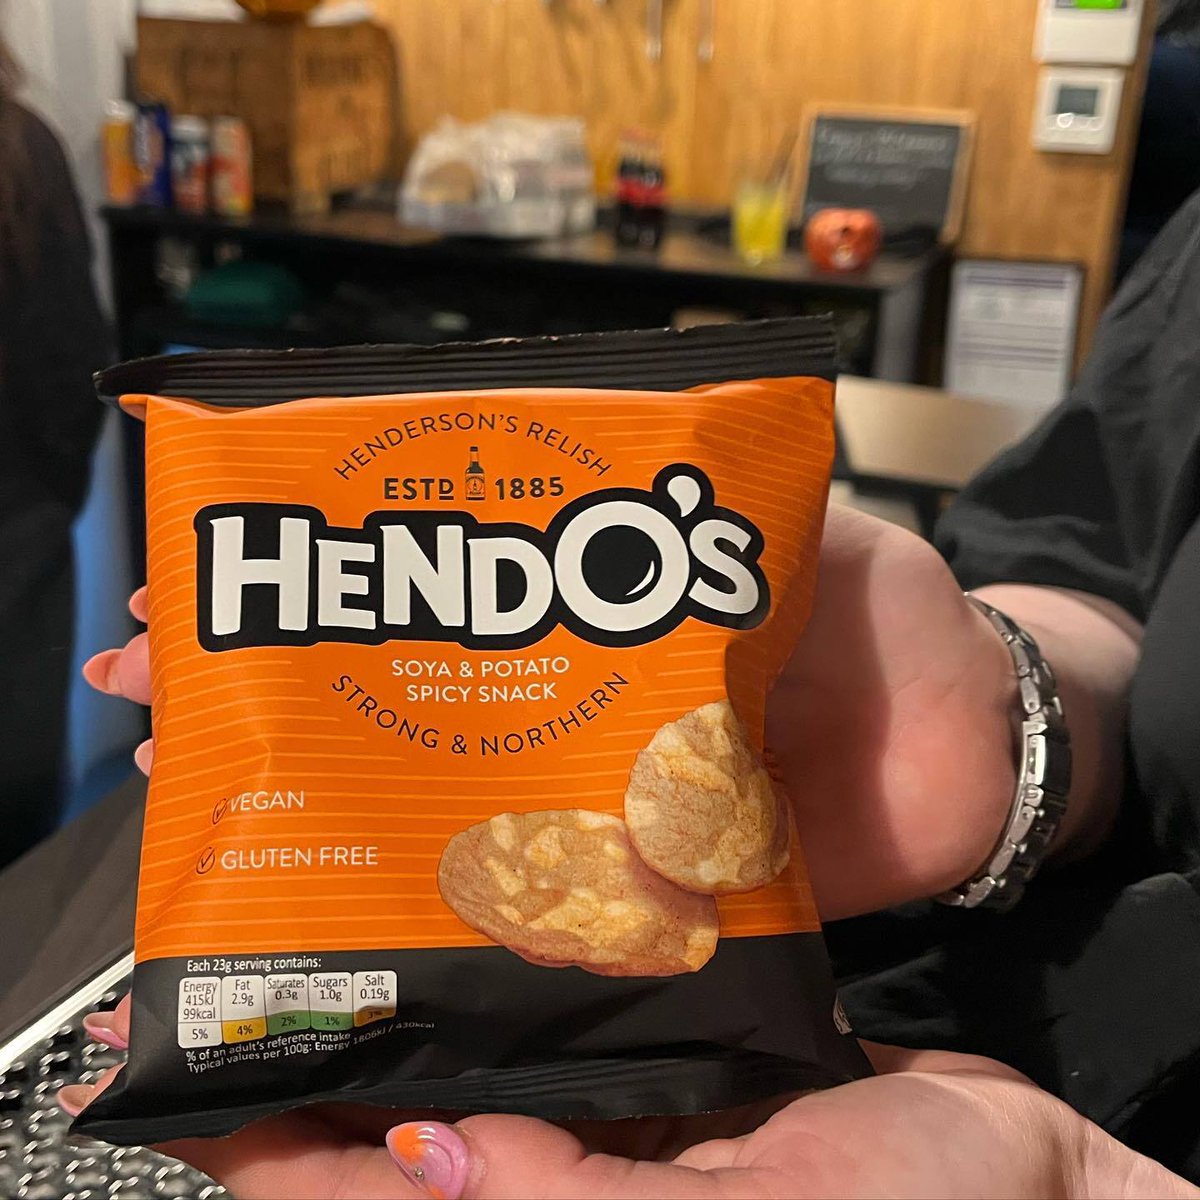 Hendo's crisps are vegan and gluten free, just like their bottled big brother. Find them at Morrisons in Sheffield, independent pubs and shops around the city and in our online shop: hendersonsrelish.com/shop 📸 instagram.com/sketsthatscran